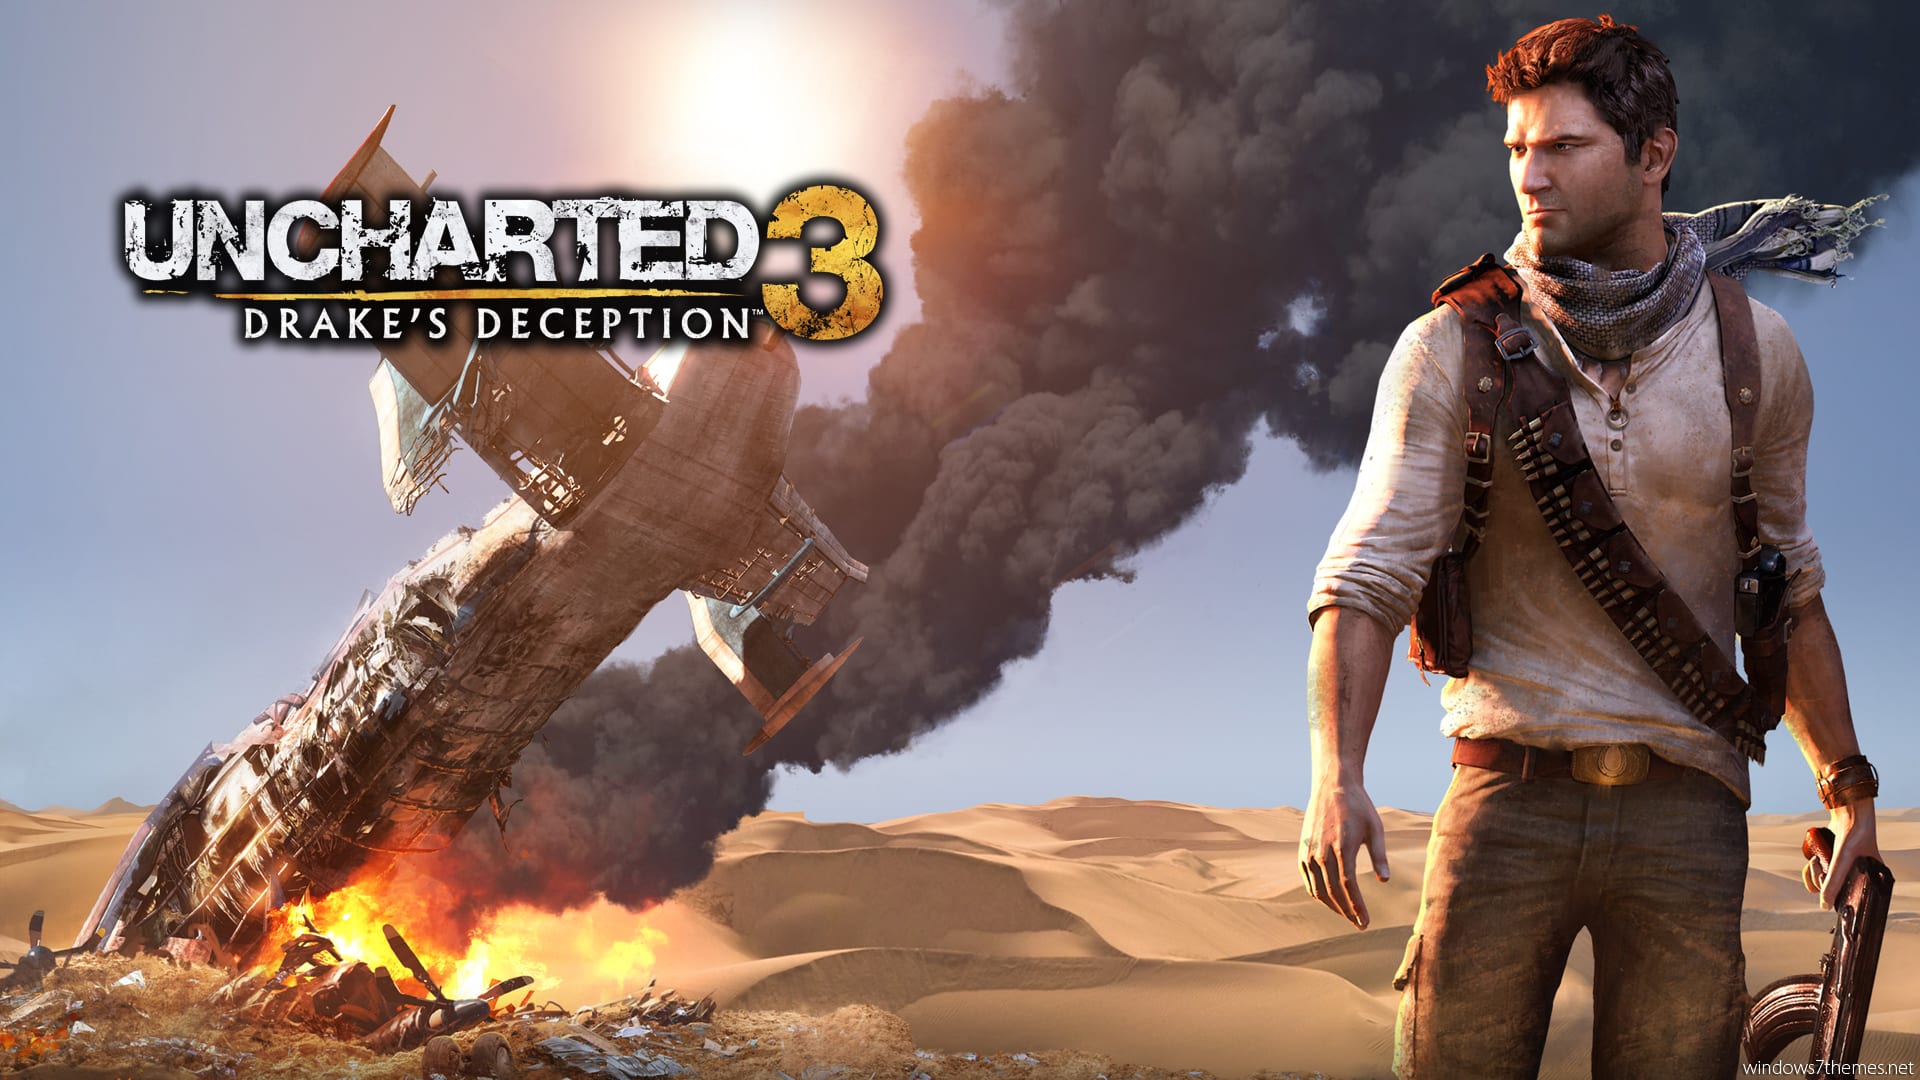 Uncharted 3 Drake's Deception Promo Image